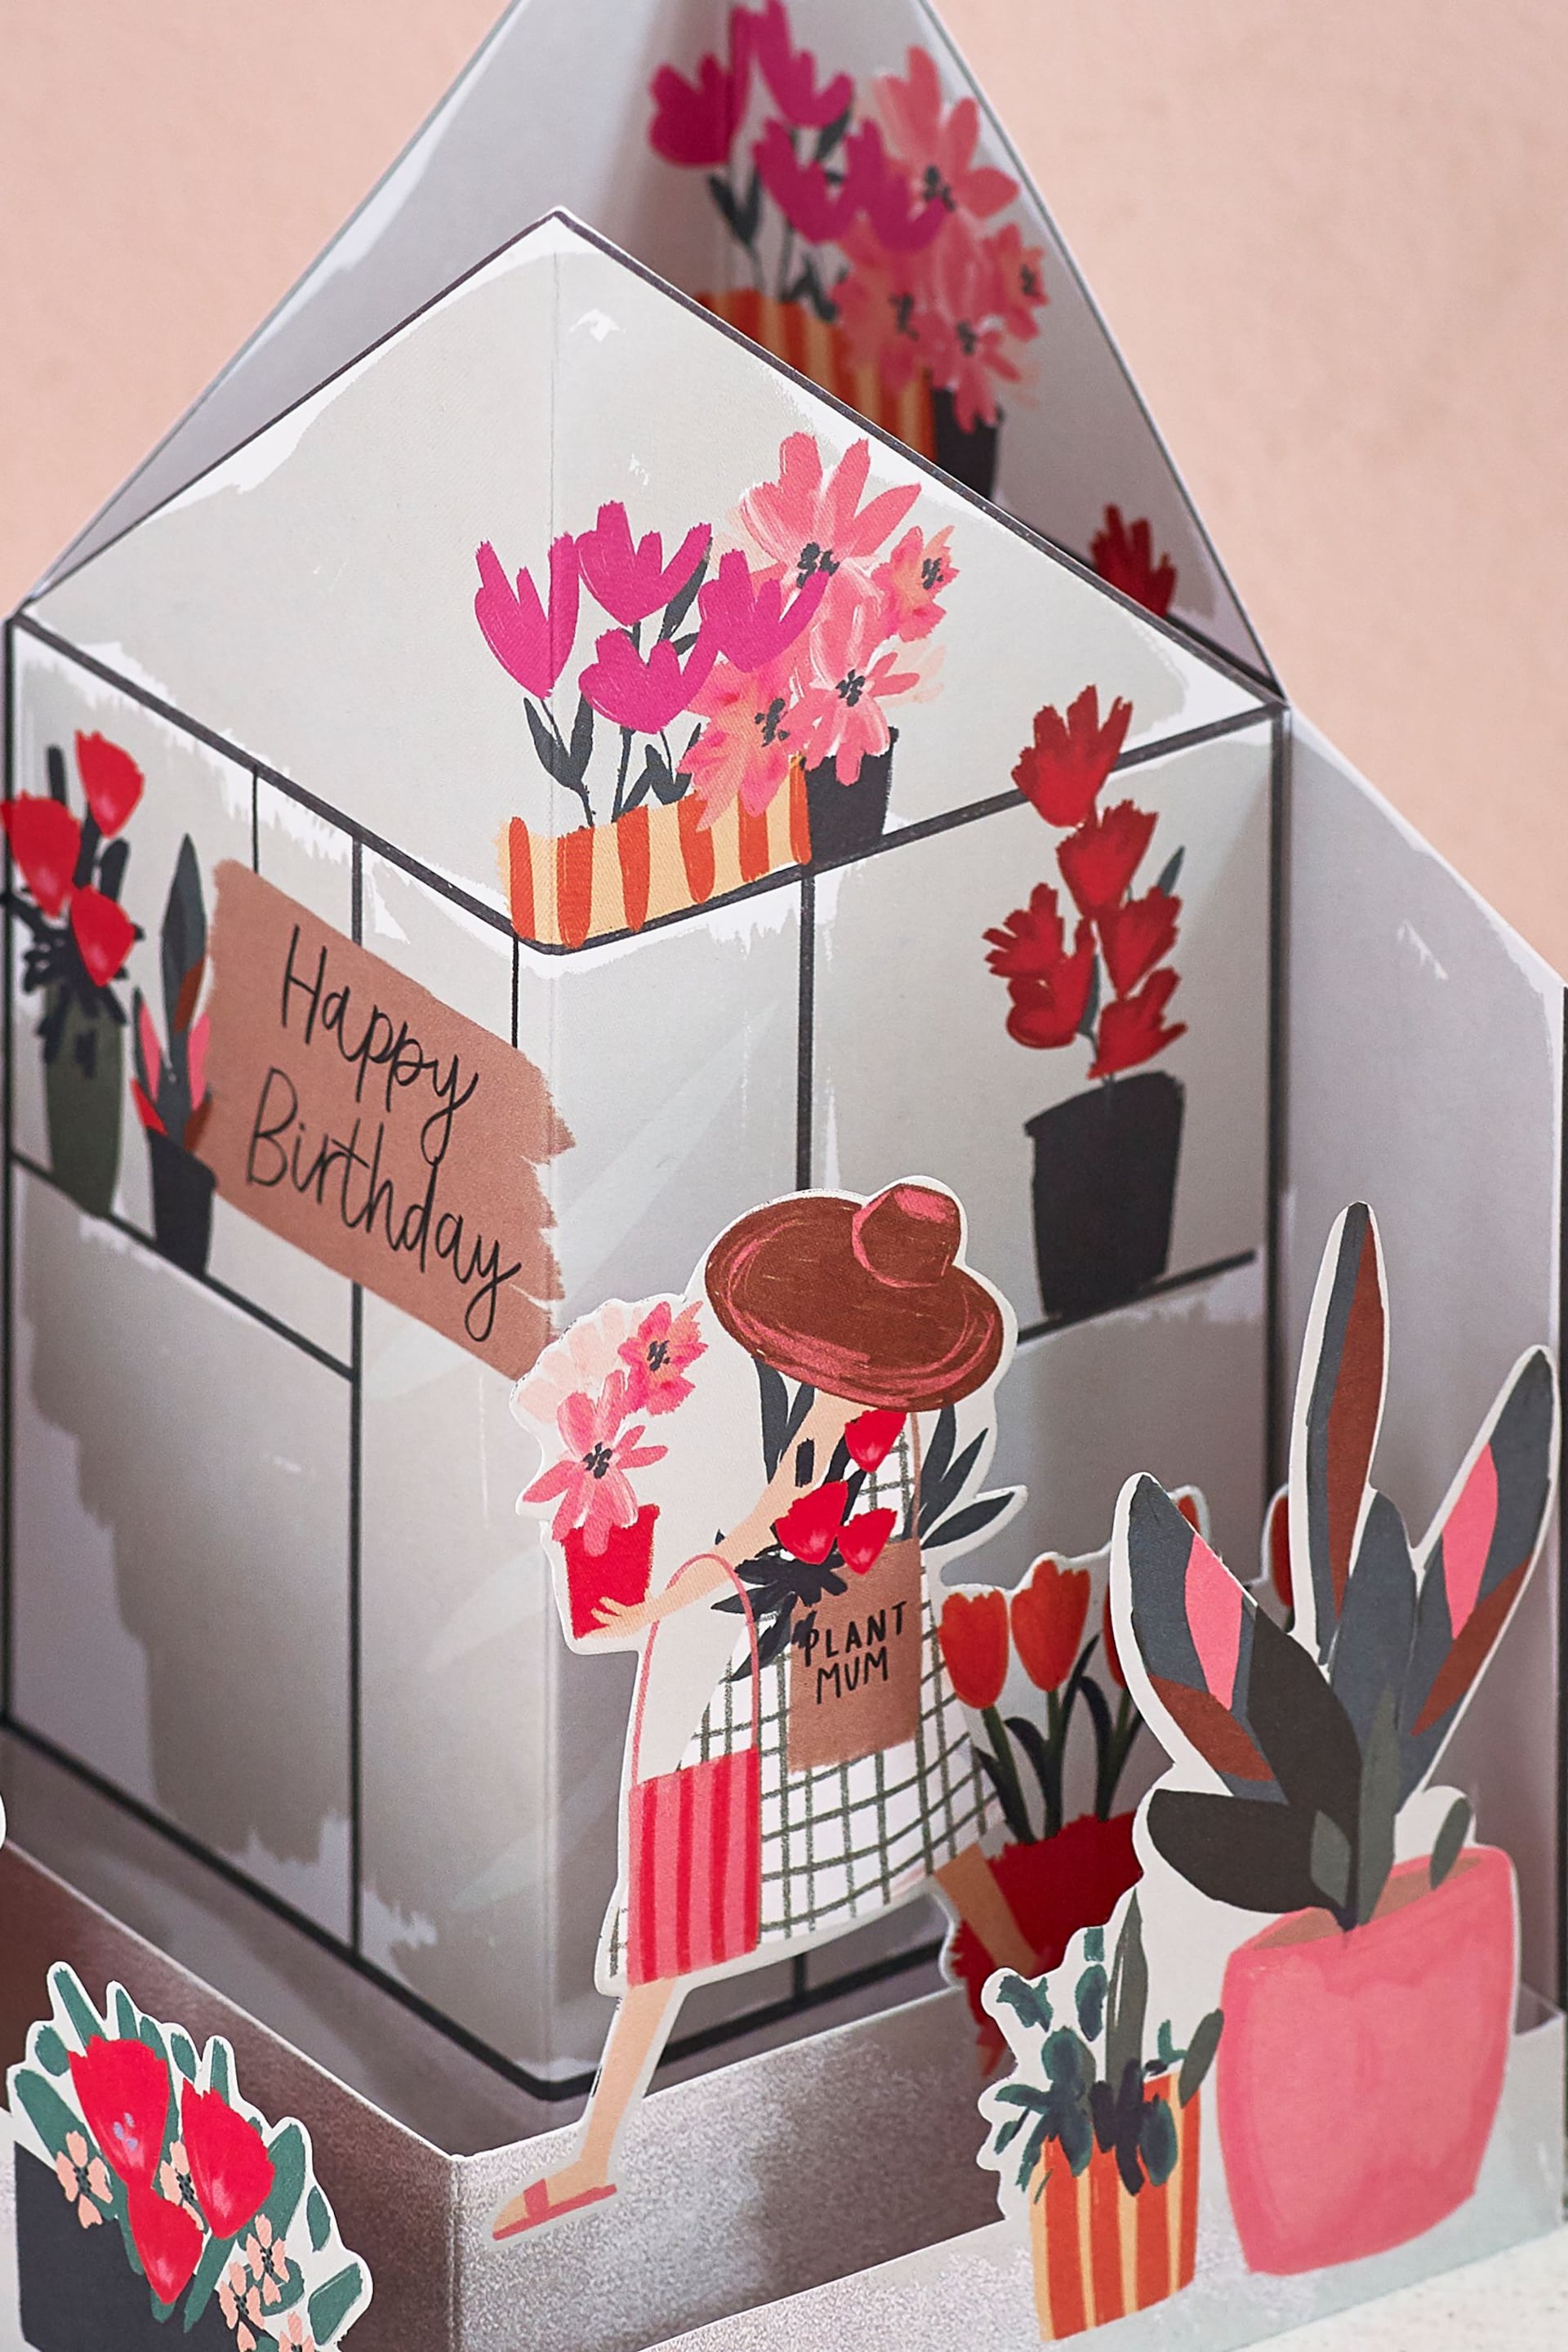 Green Pop Up Greenhouse Birthday Card - Image 2 of 4